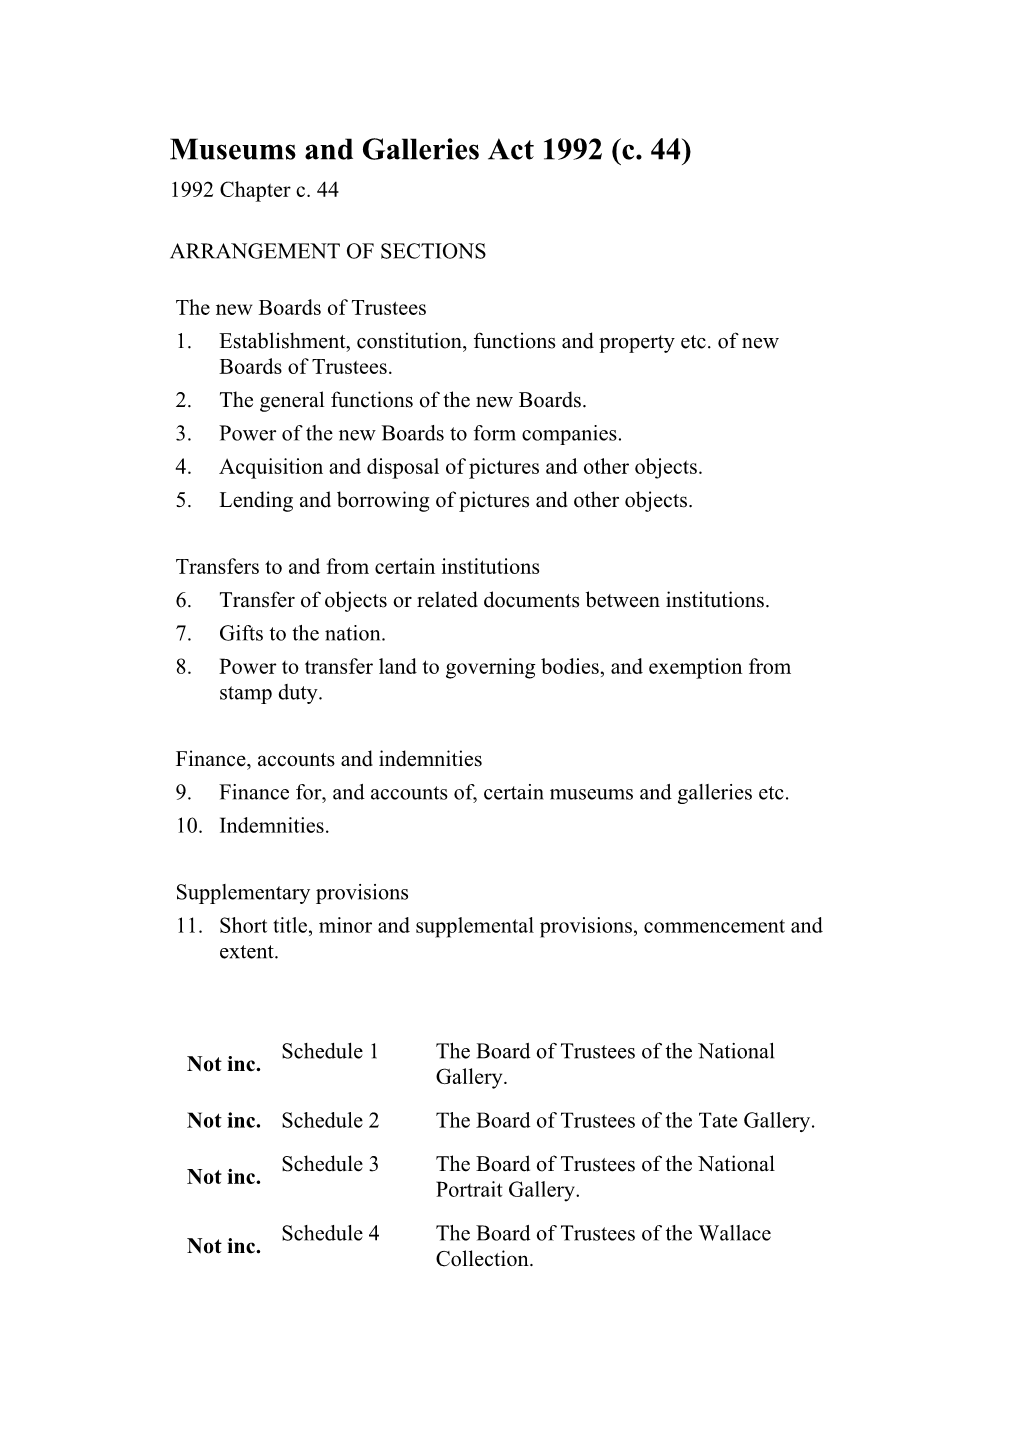 Museums and Galleries Act 1992 (C